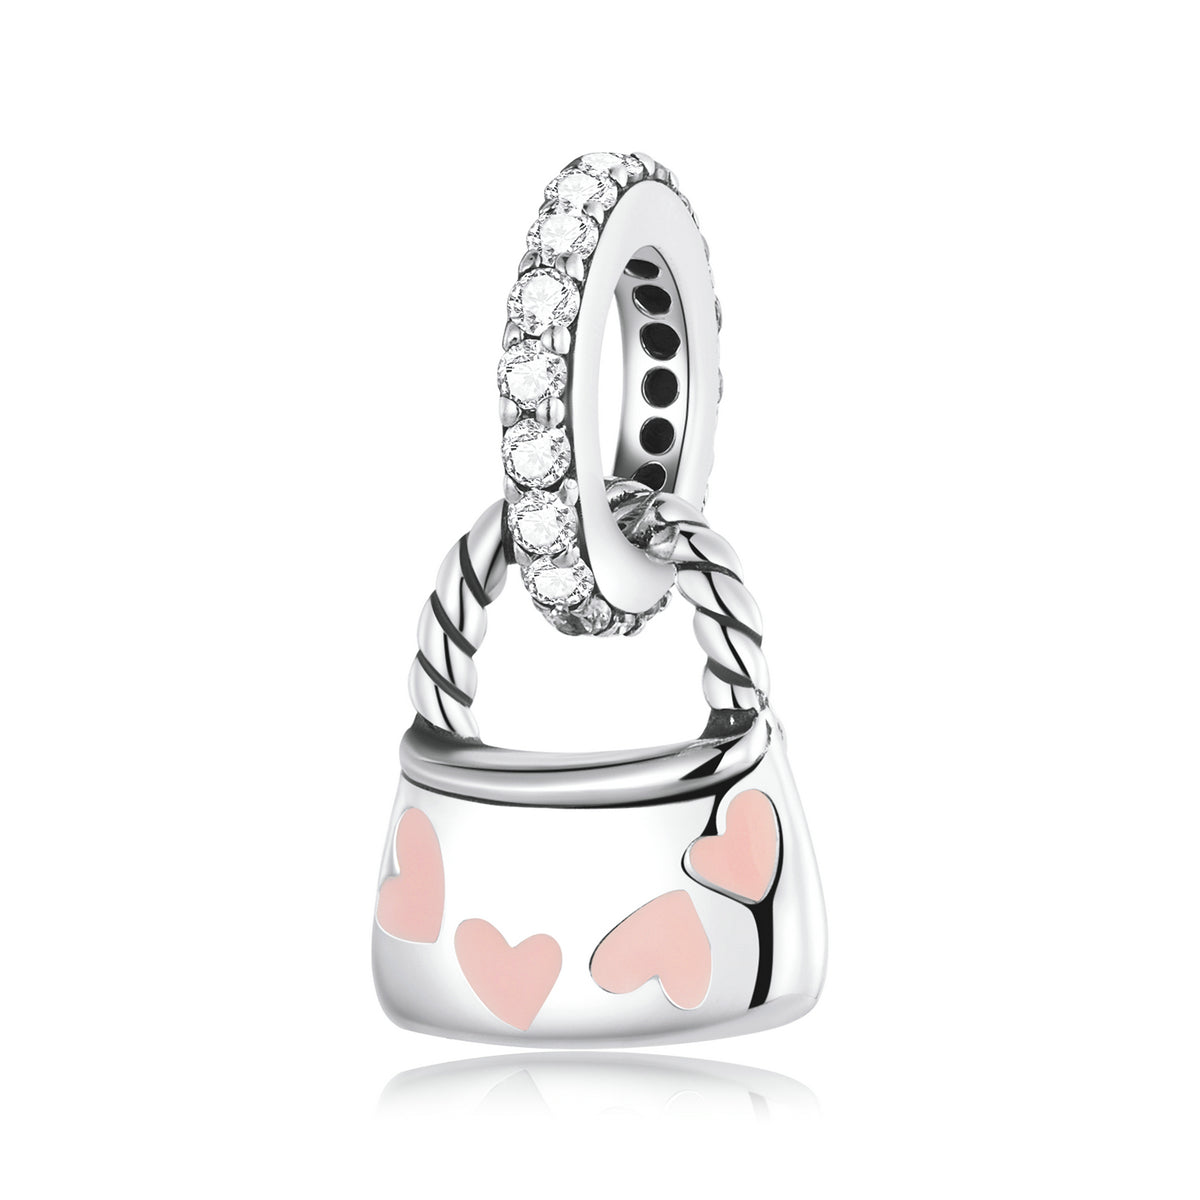 Handbag with Pink Hearts Sterling Silver Charm Pendants